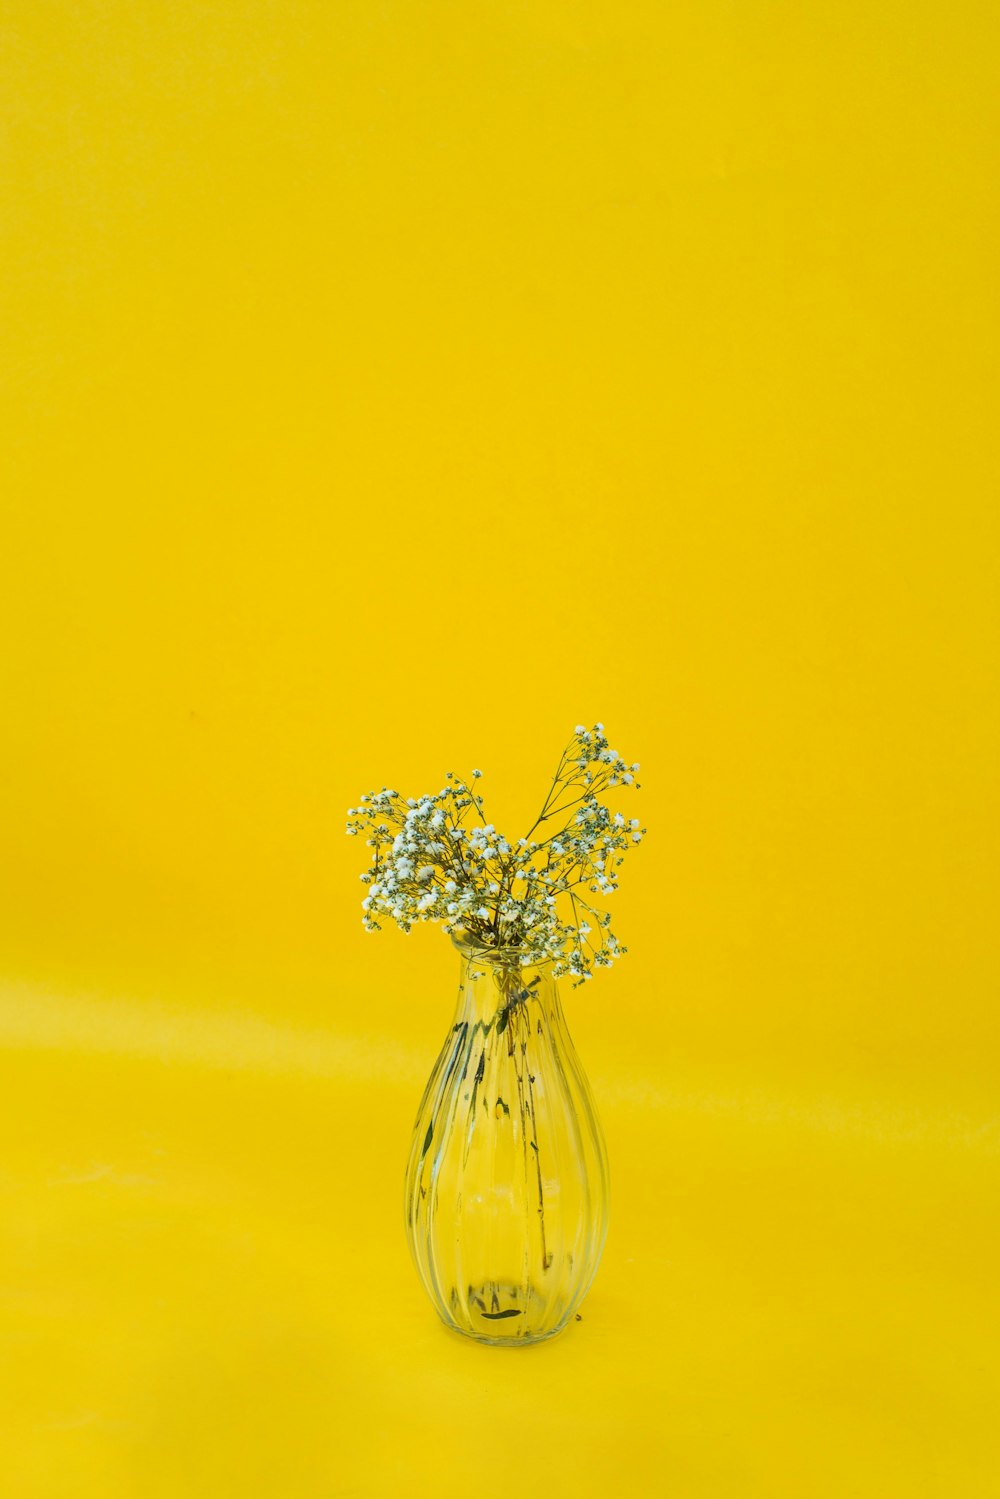 white flowers in clear glass vase photo – Free Yellow Image on Unsplash